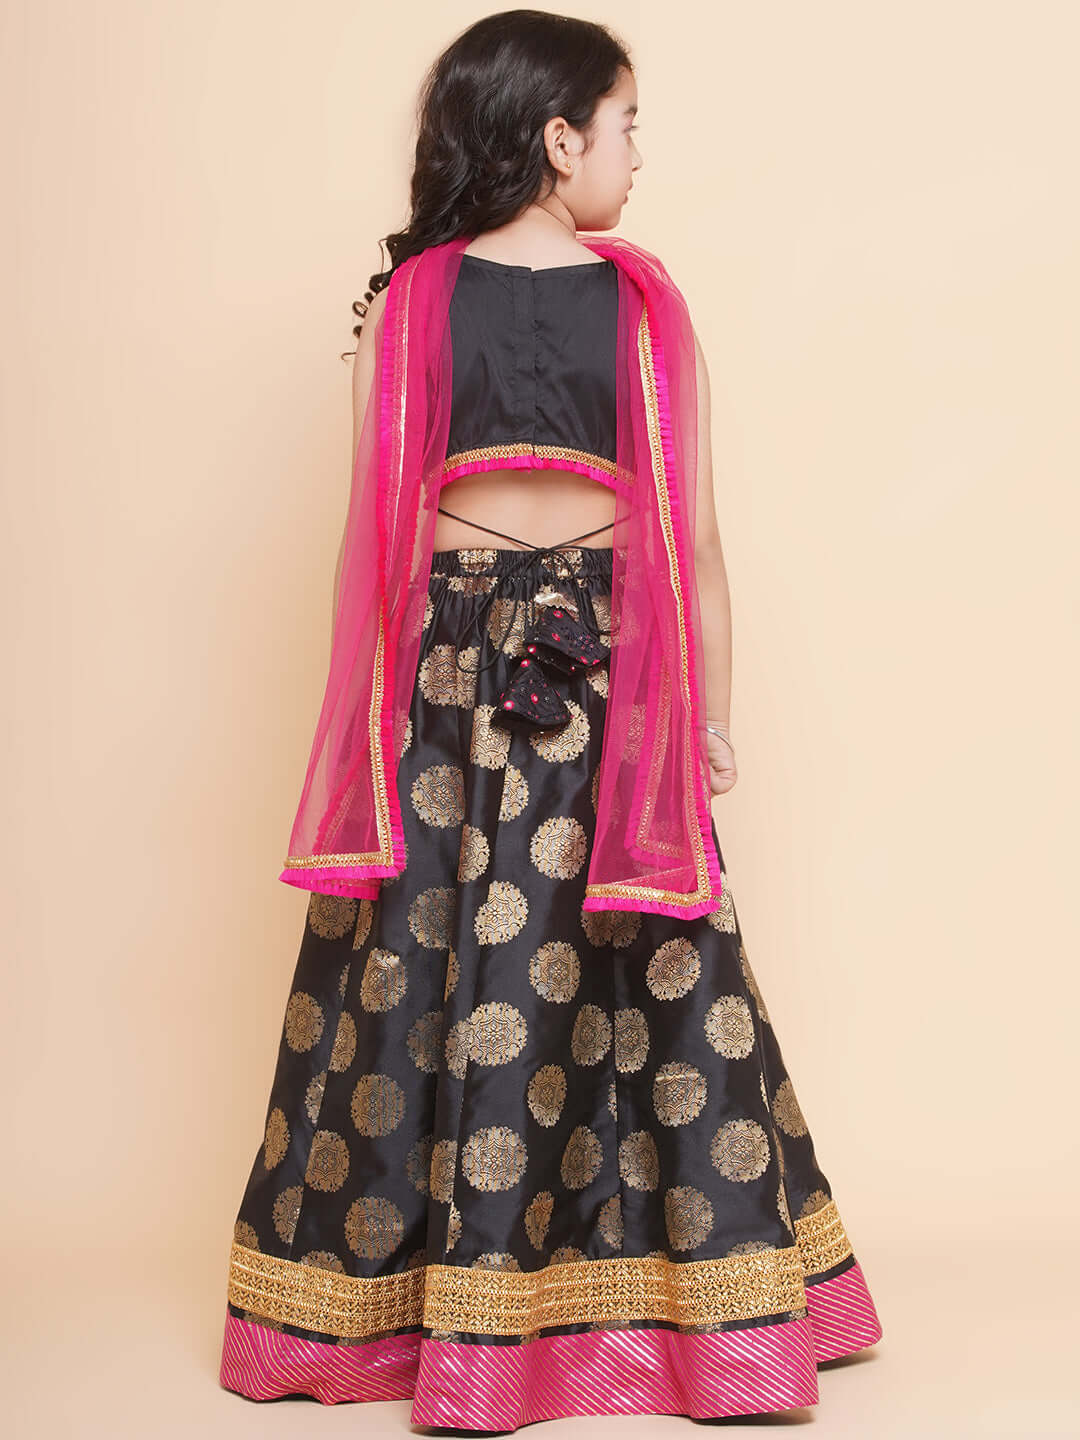 Purple Prunes Girls Black Gold Toned Embroidered Lehenga Blouse Red Dupatta Clothes